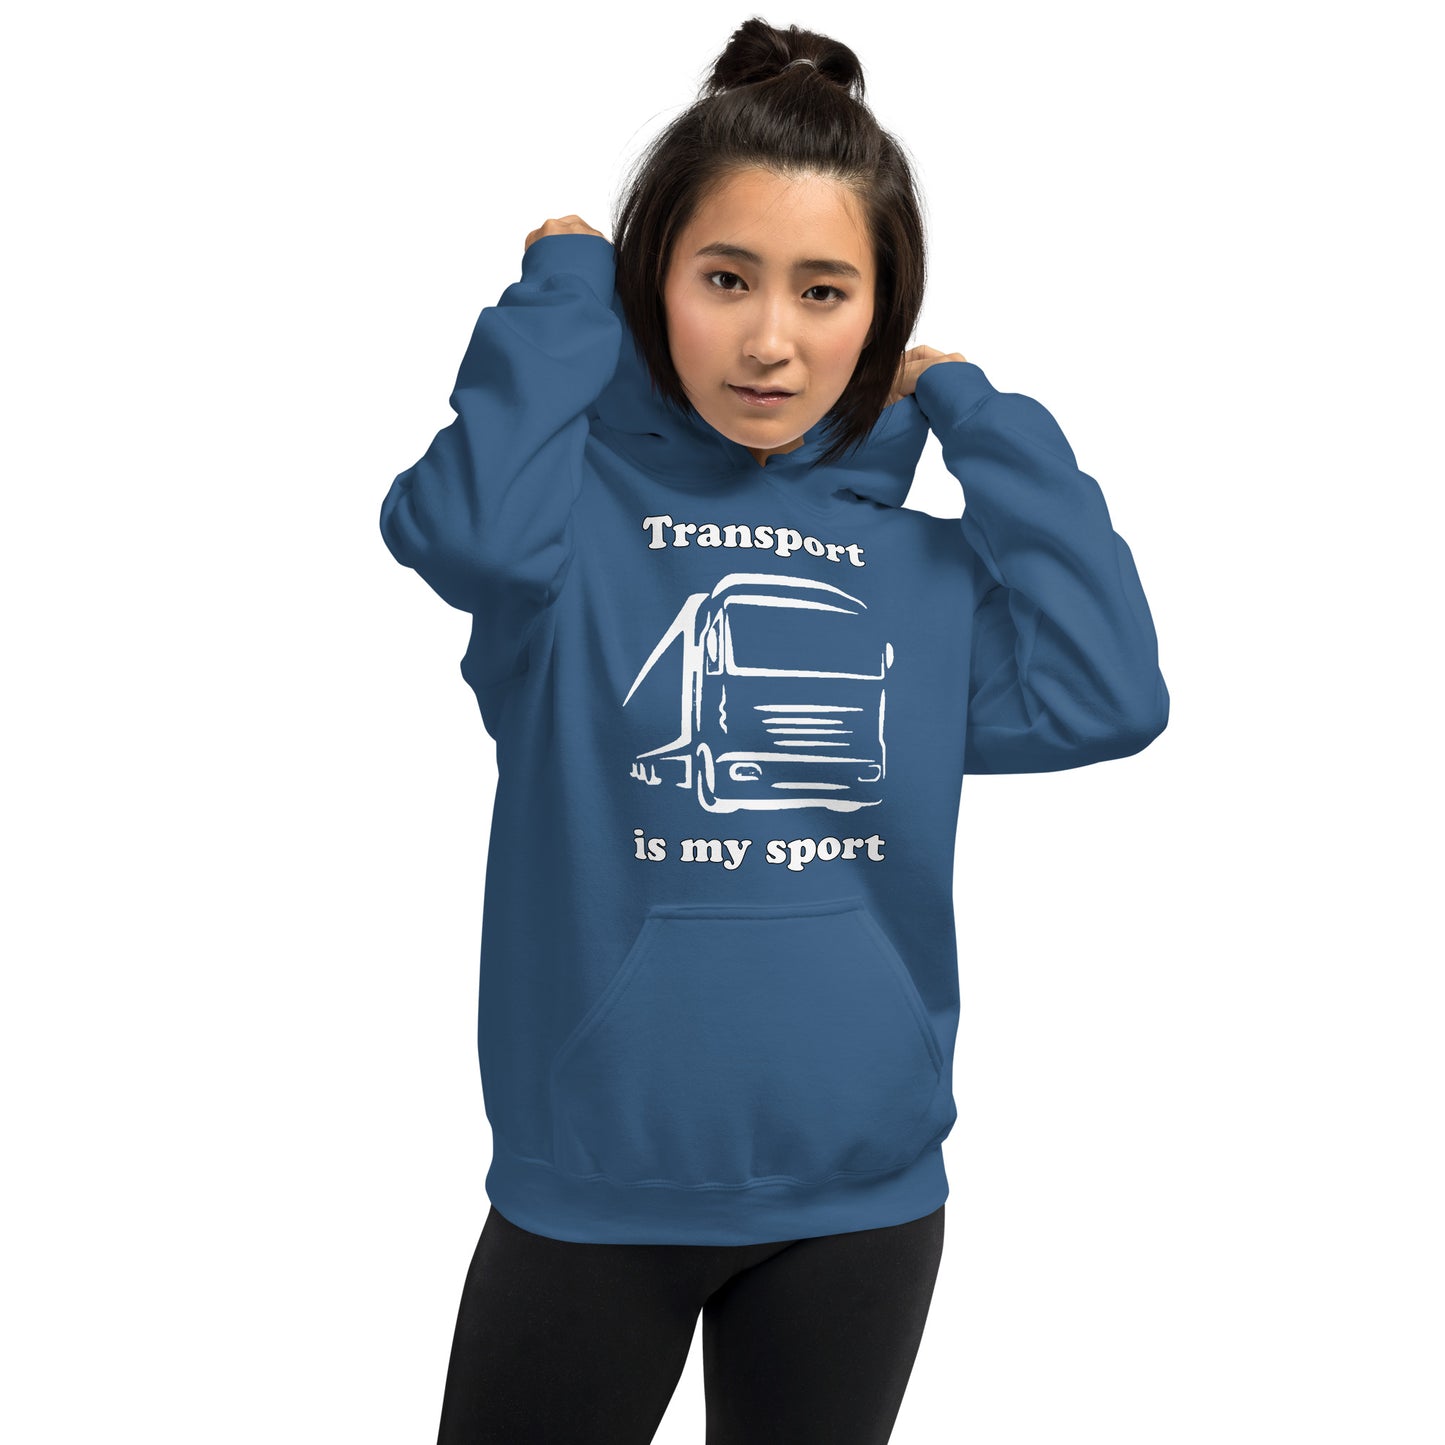 Woman with indigo blue hoodie with picture of truck and text "Transport is my sport"